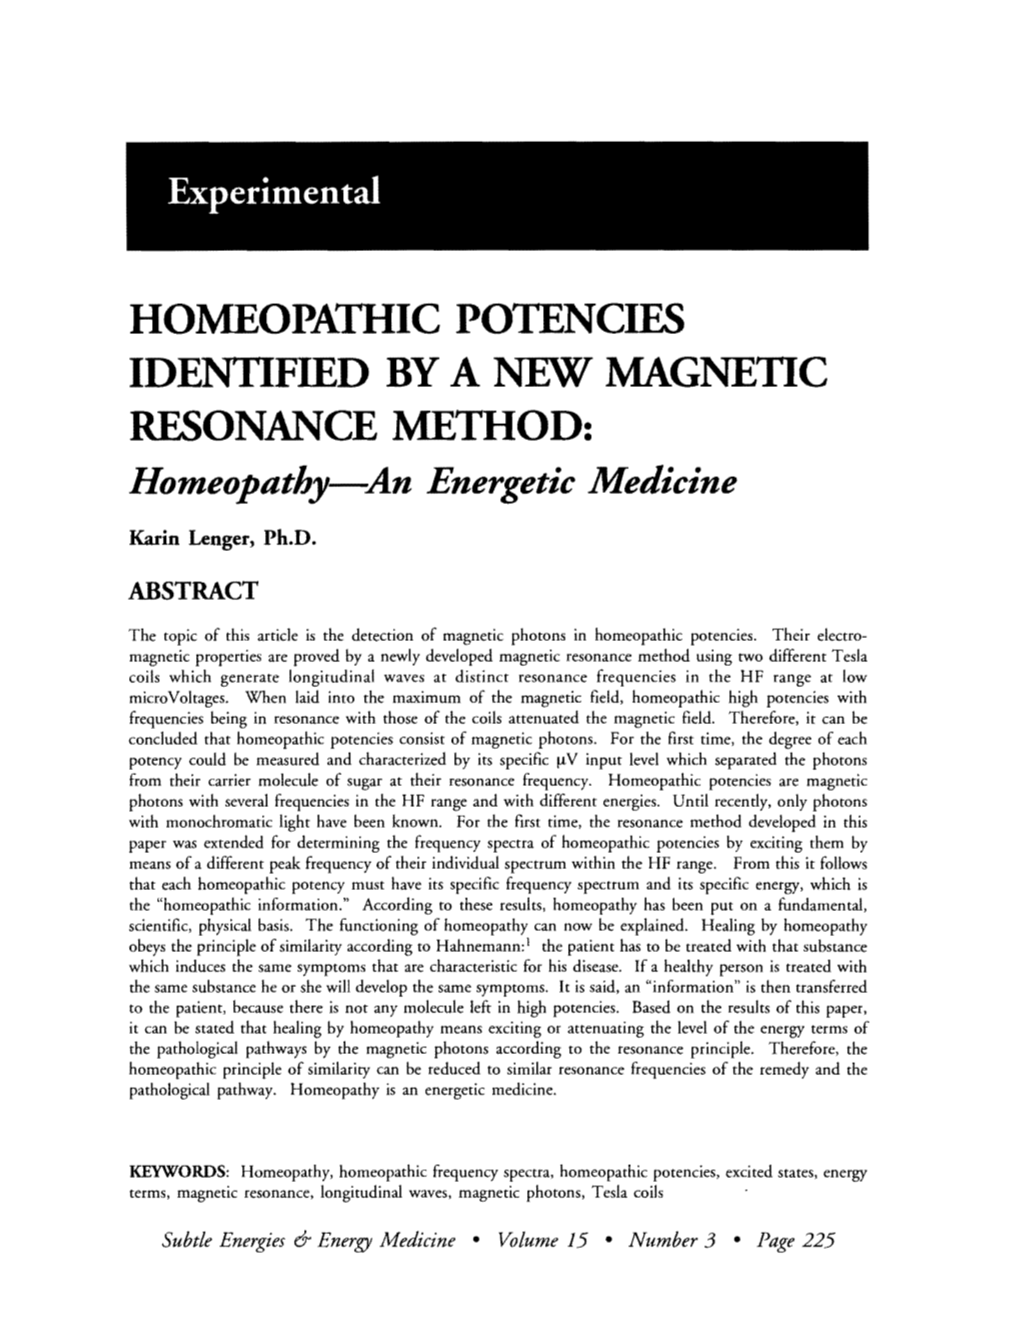 IDENTIFIED by a NEW MAGNETIC RESONANCE Mrnthod: Homeopathy-An Energetic Medicine